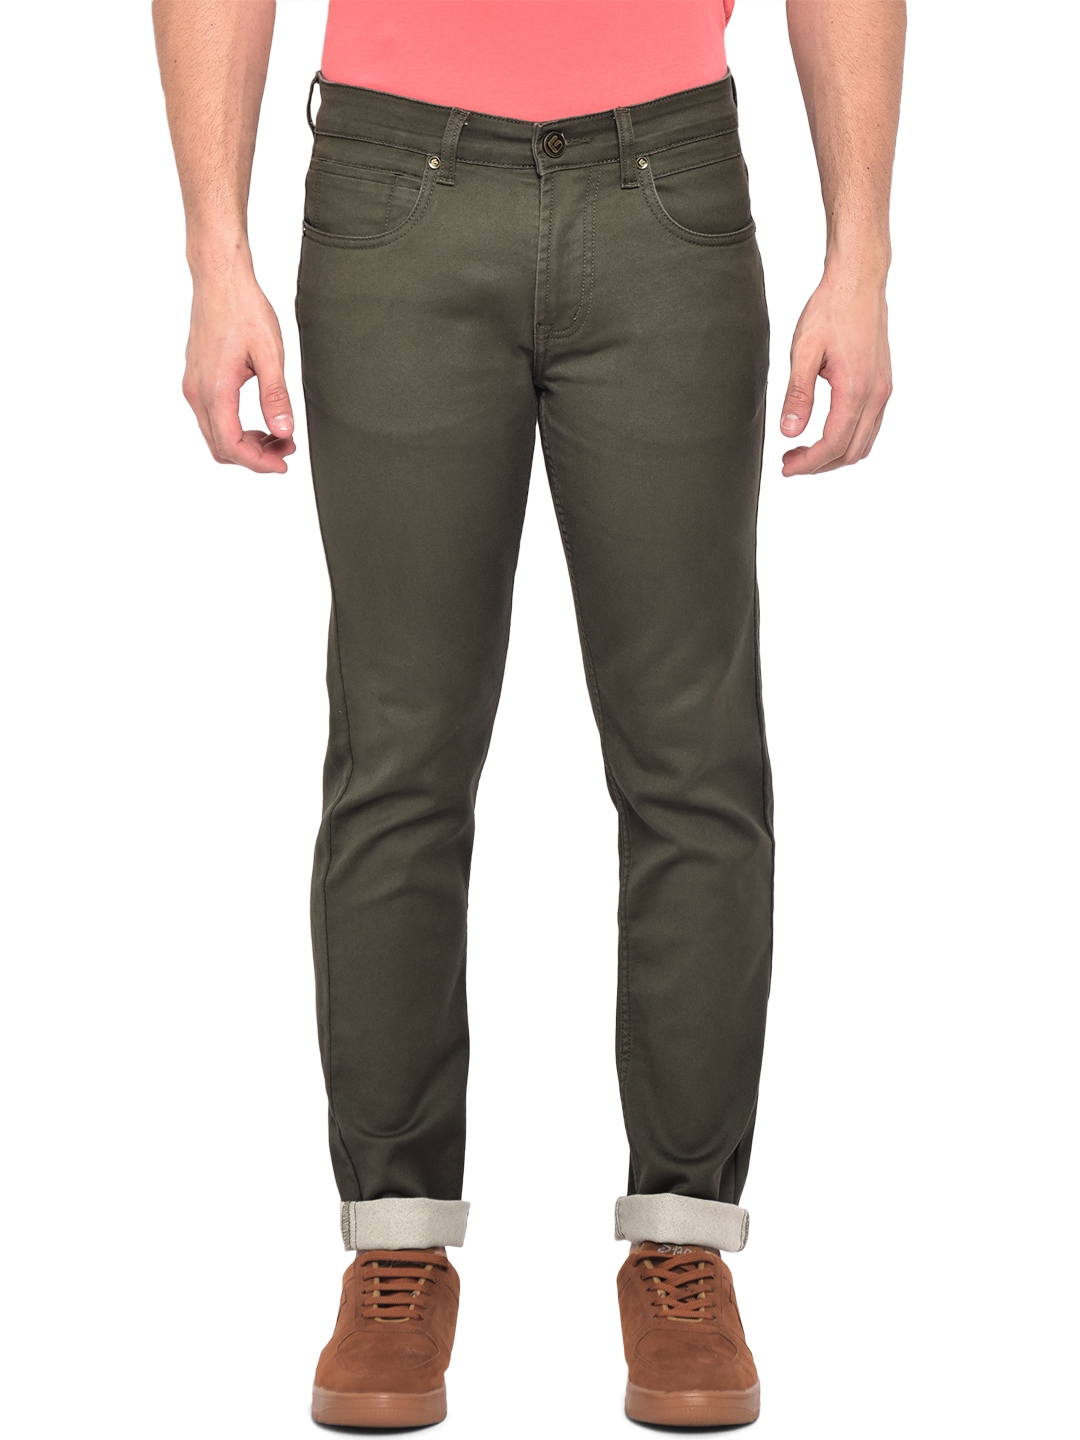 Greenfibre | Olive Washed Narrow Fit Jeans | Greenfibre